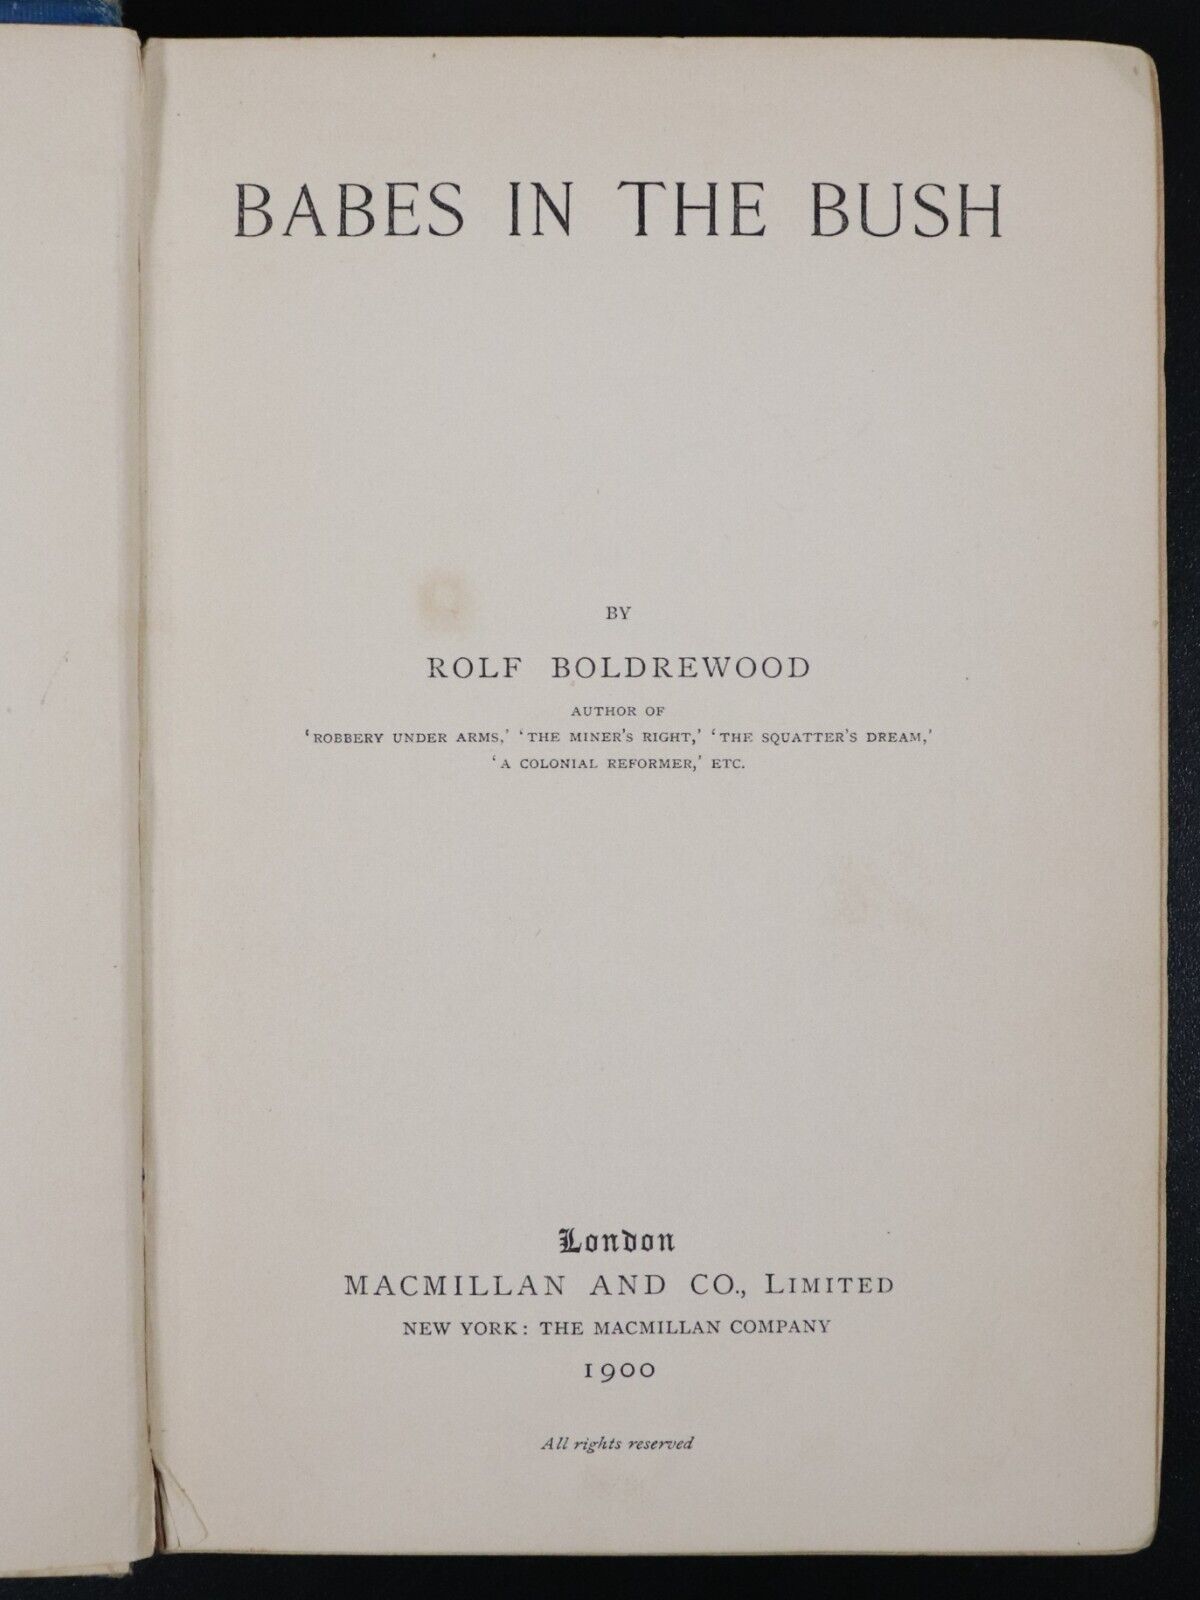 1900 Babes In The Bush by Rolf Boldrewood Antique Australian Bush Fiction Book - 0